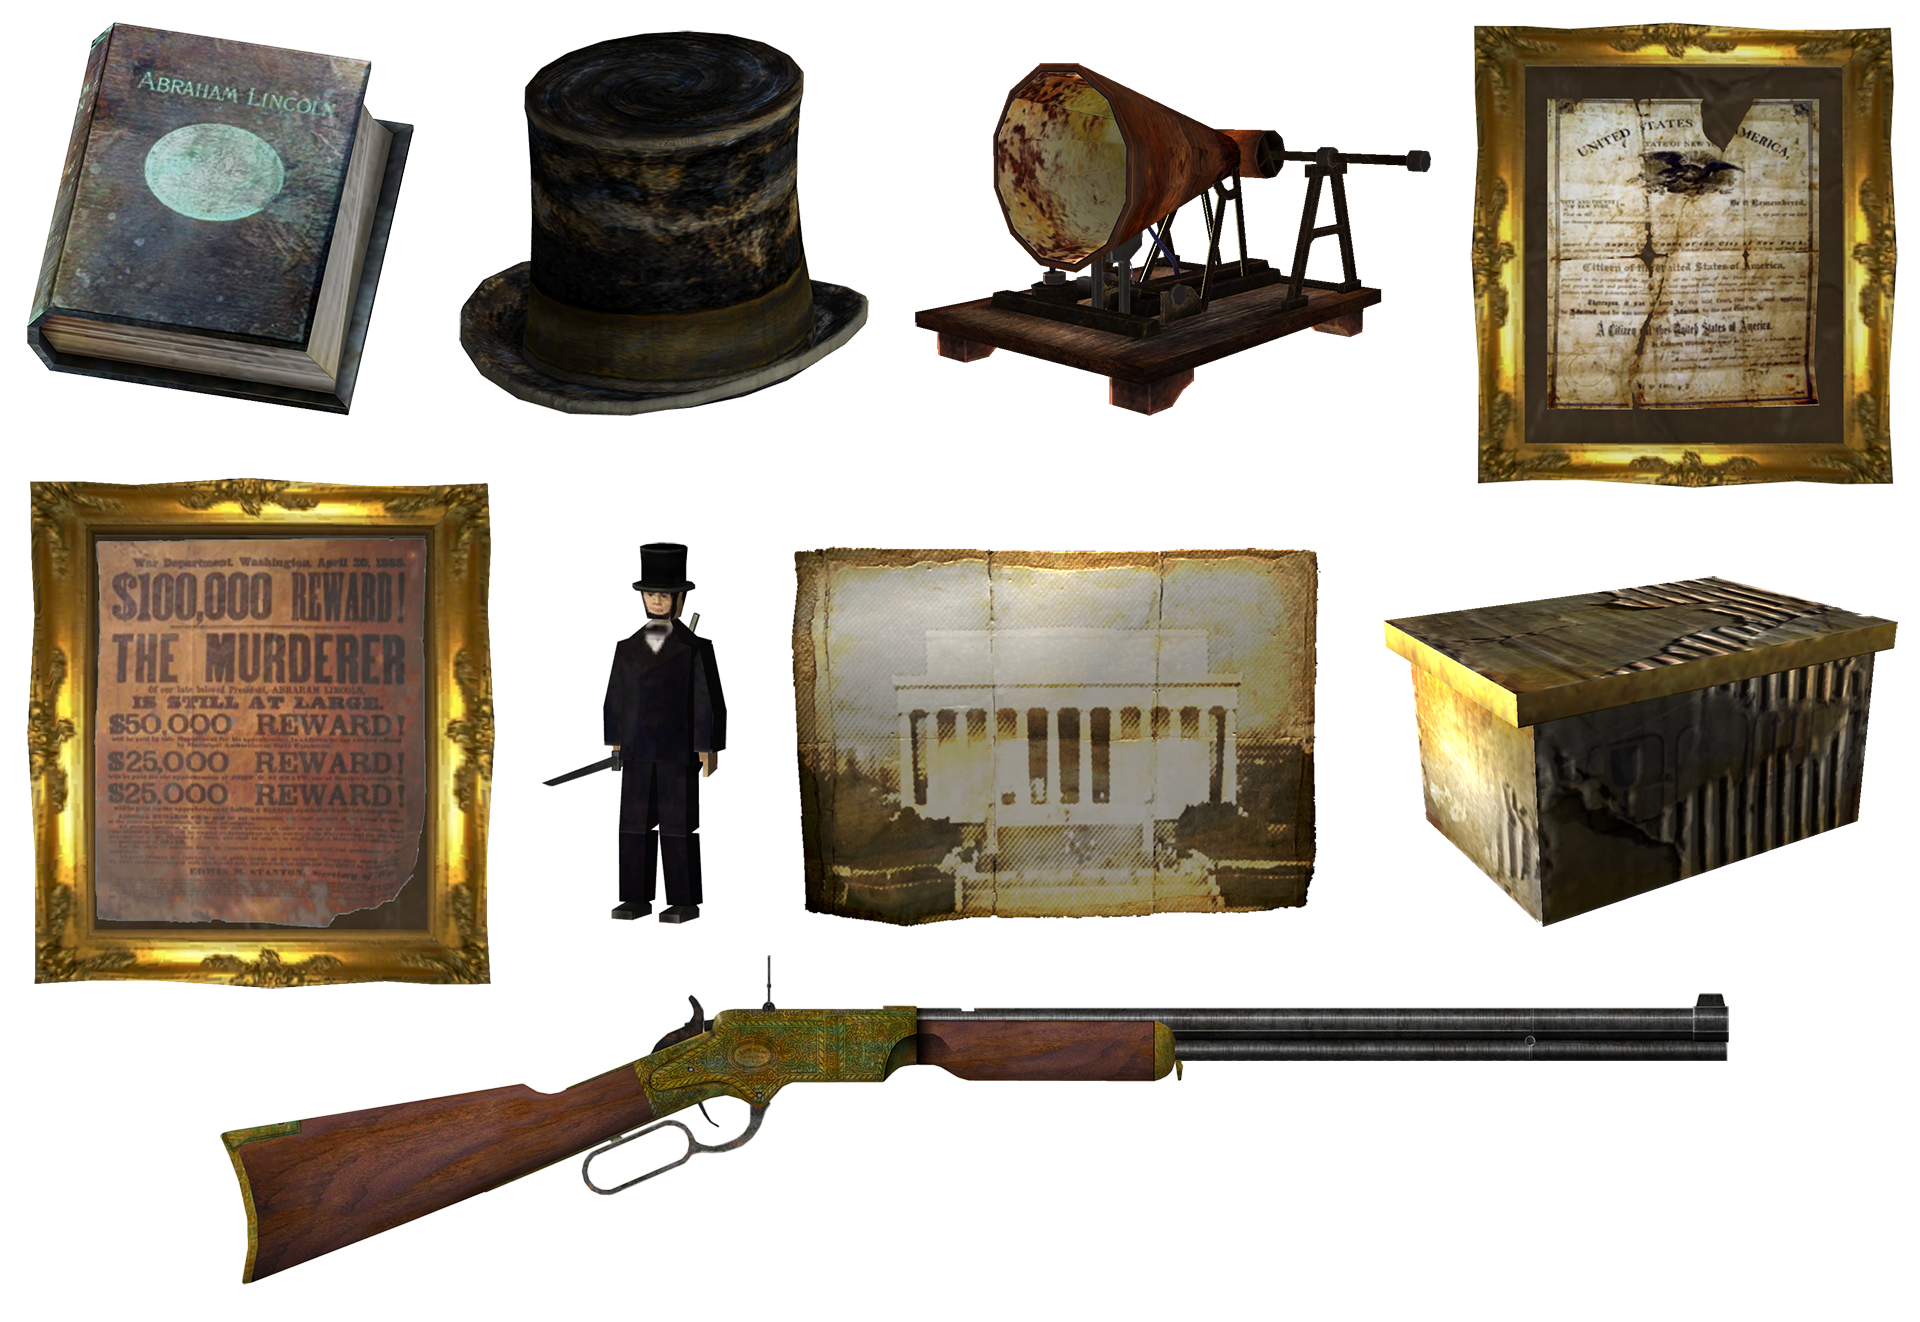 Prime Gaming loot, Fallout Wiki